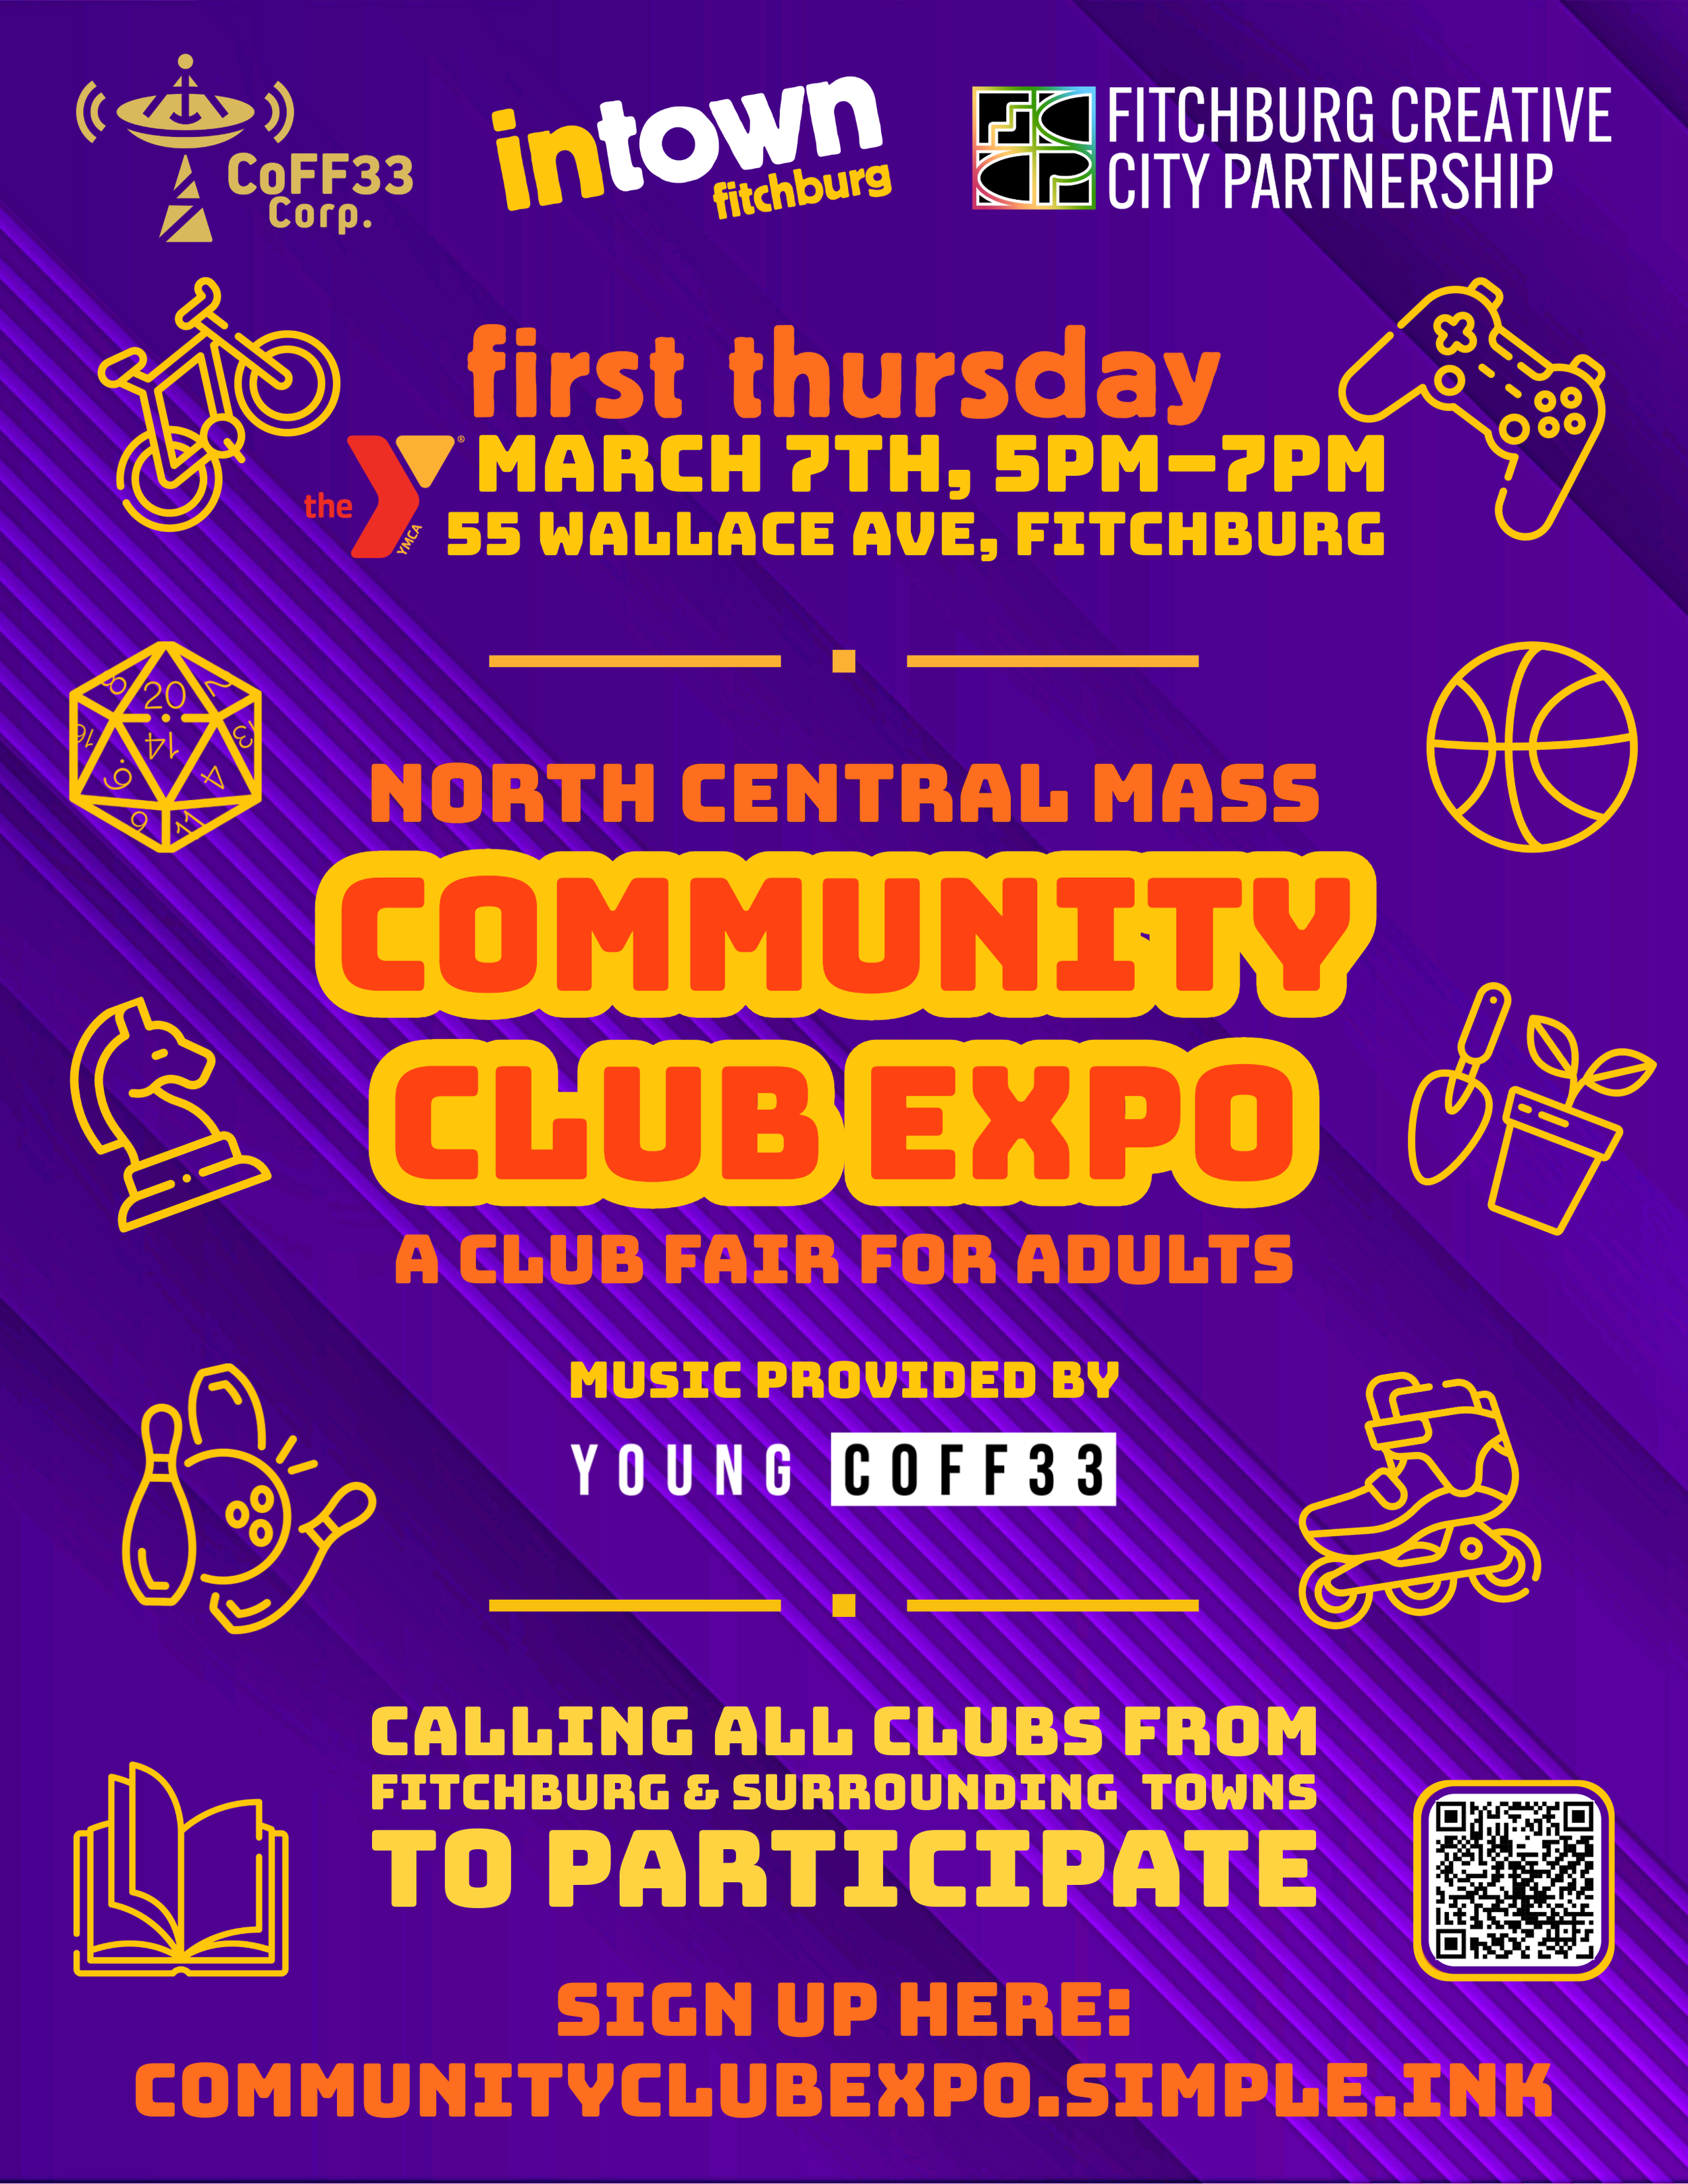 Community Club Expo flyer - full color.png